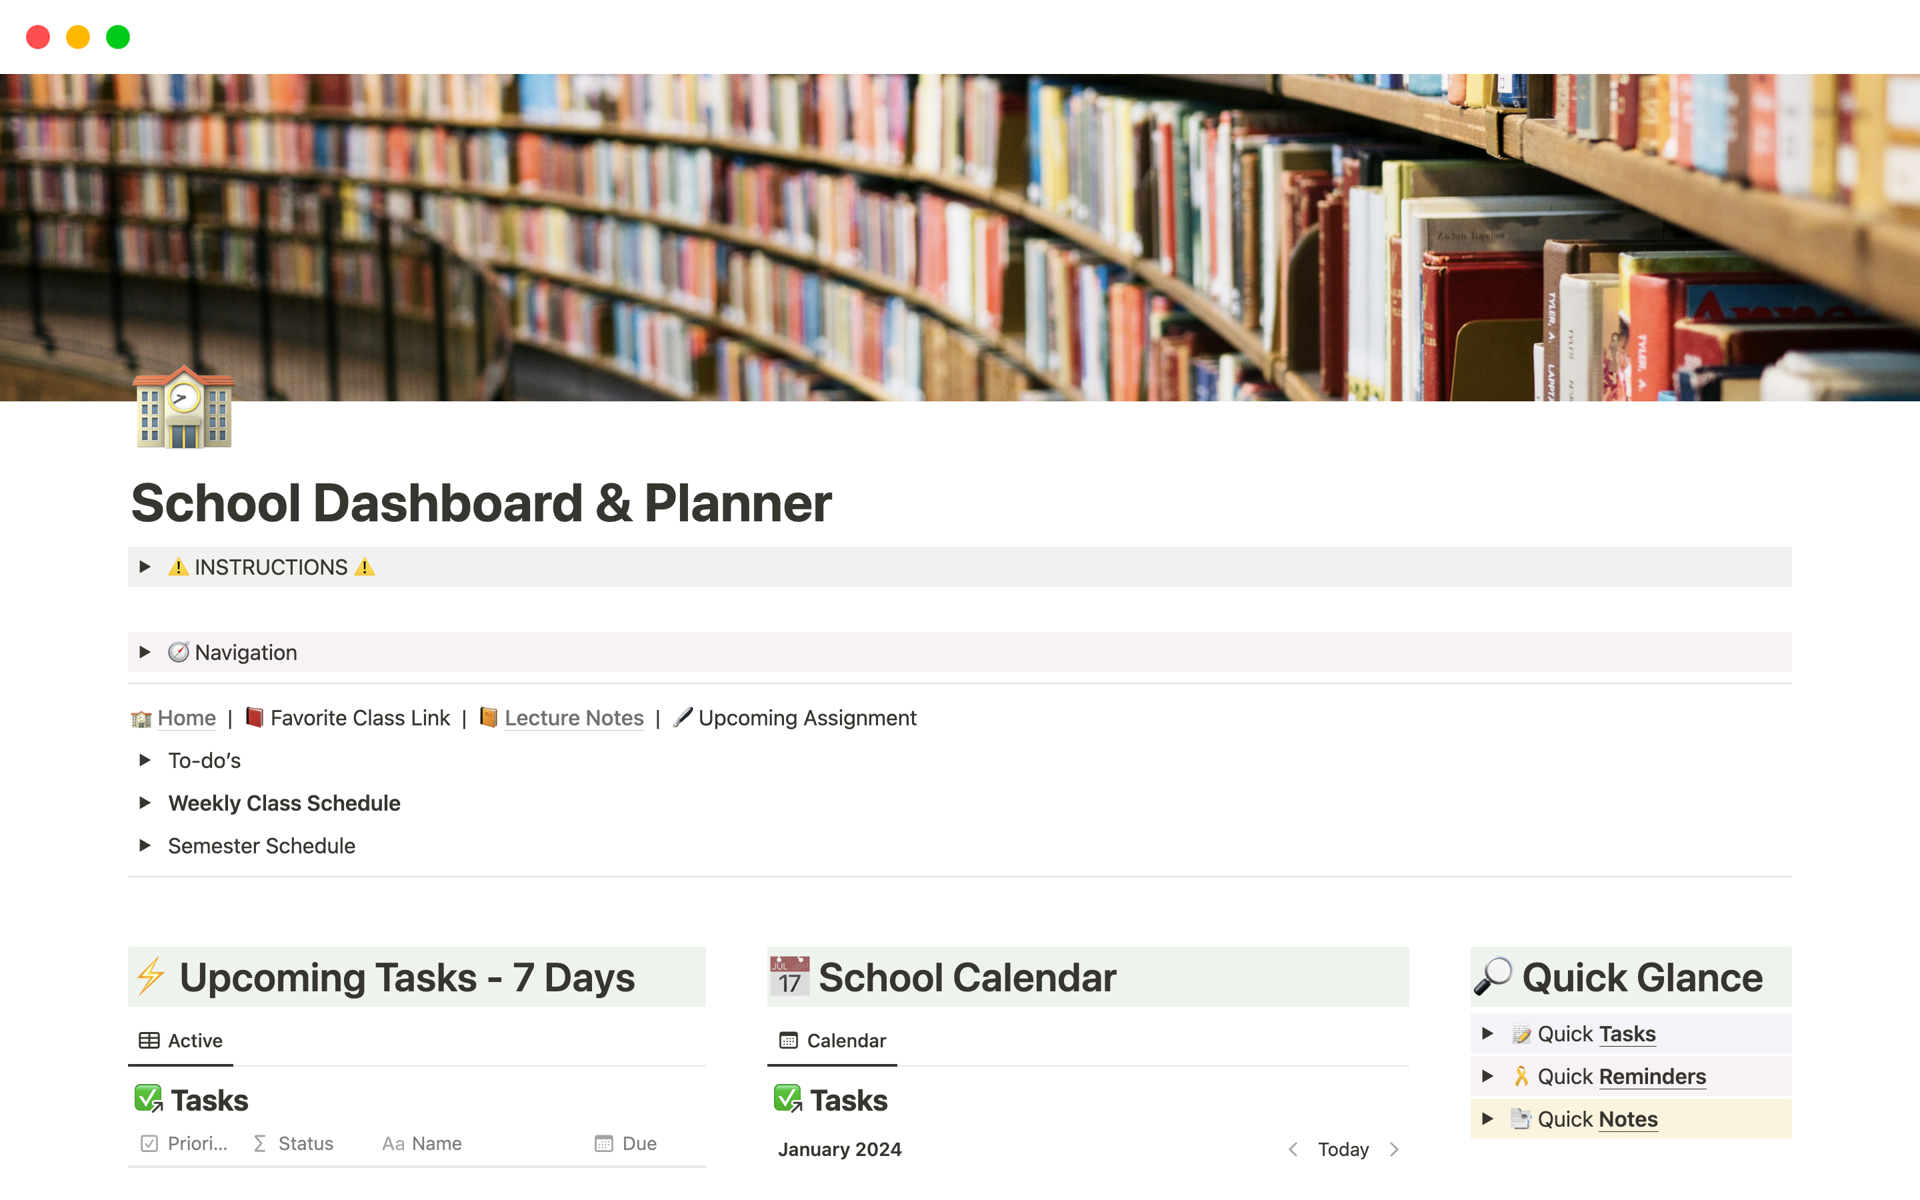 Transform your student life with our Notion School Dashboard Template—an all-in-one organizational solution for schedules, assignments, and tasks